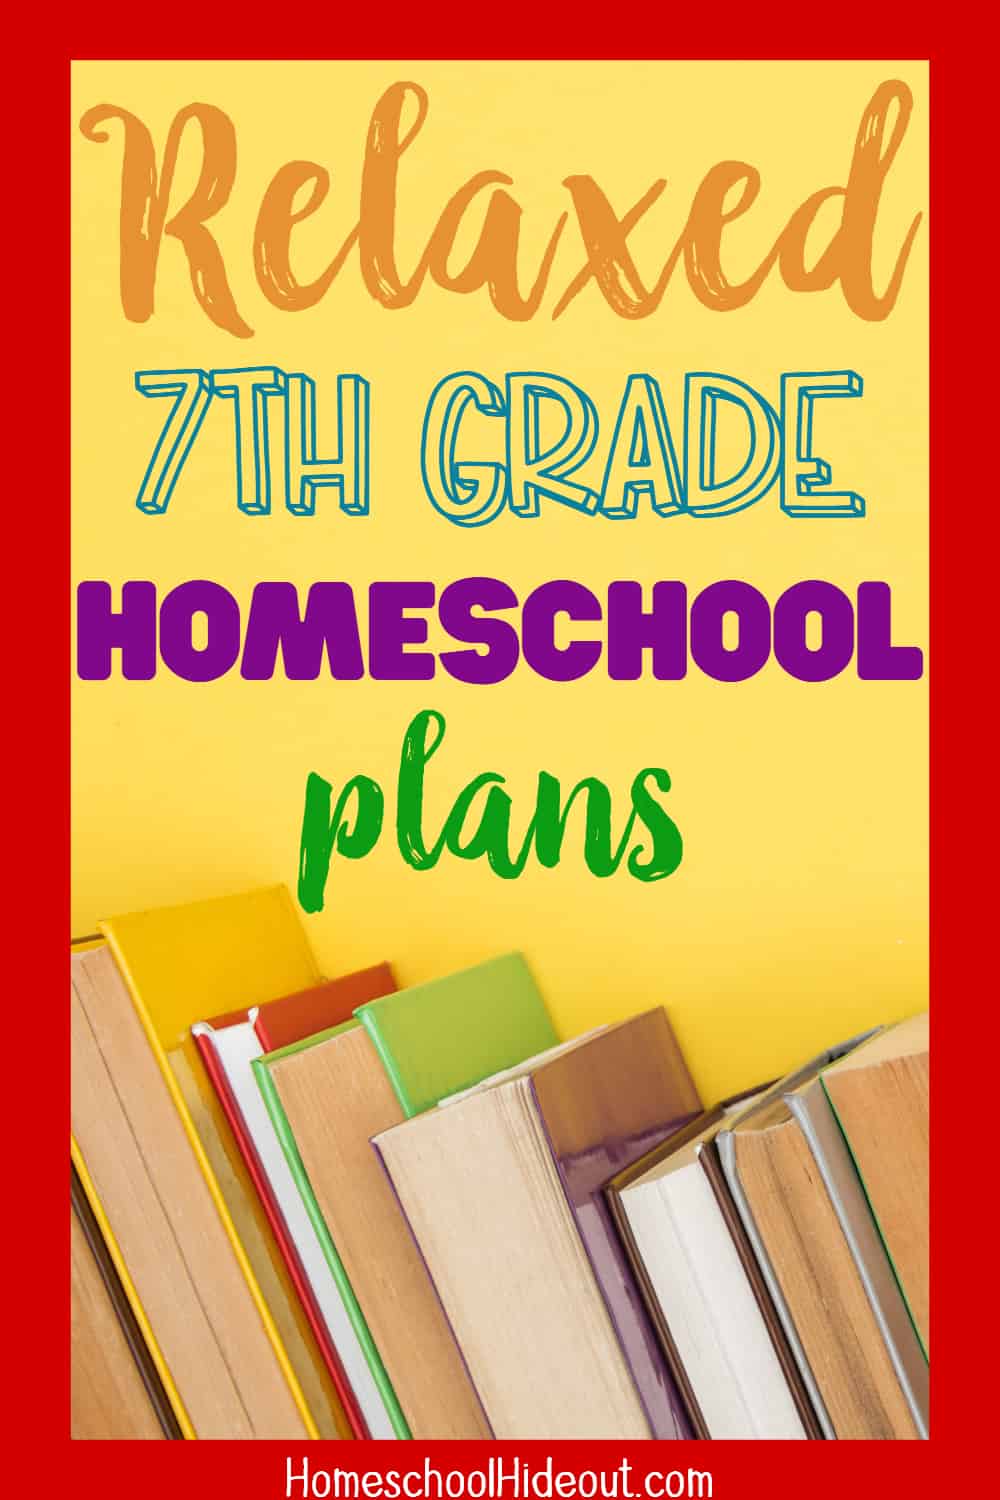 These 7th grade homeschool plans are relaxed and realistic! I'm excited to try out some of these ideas.